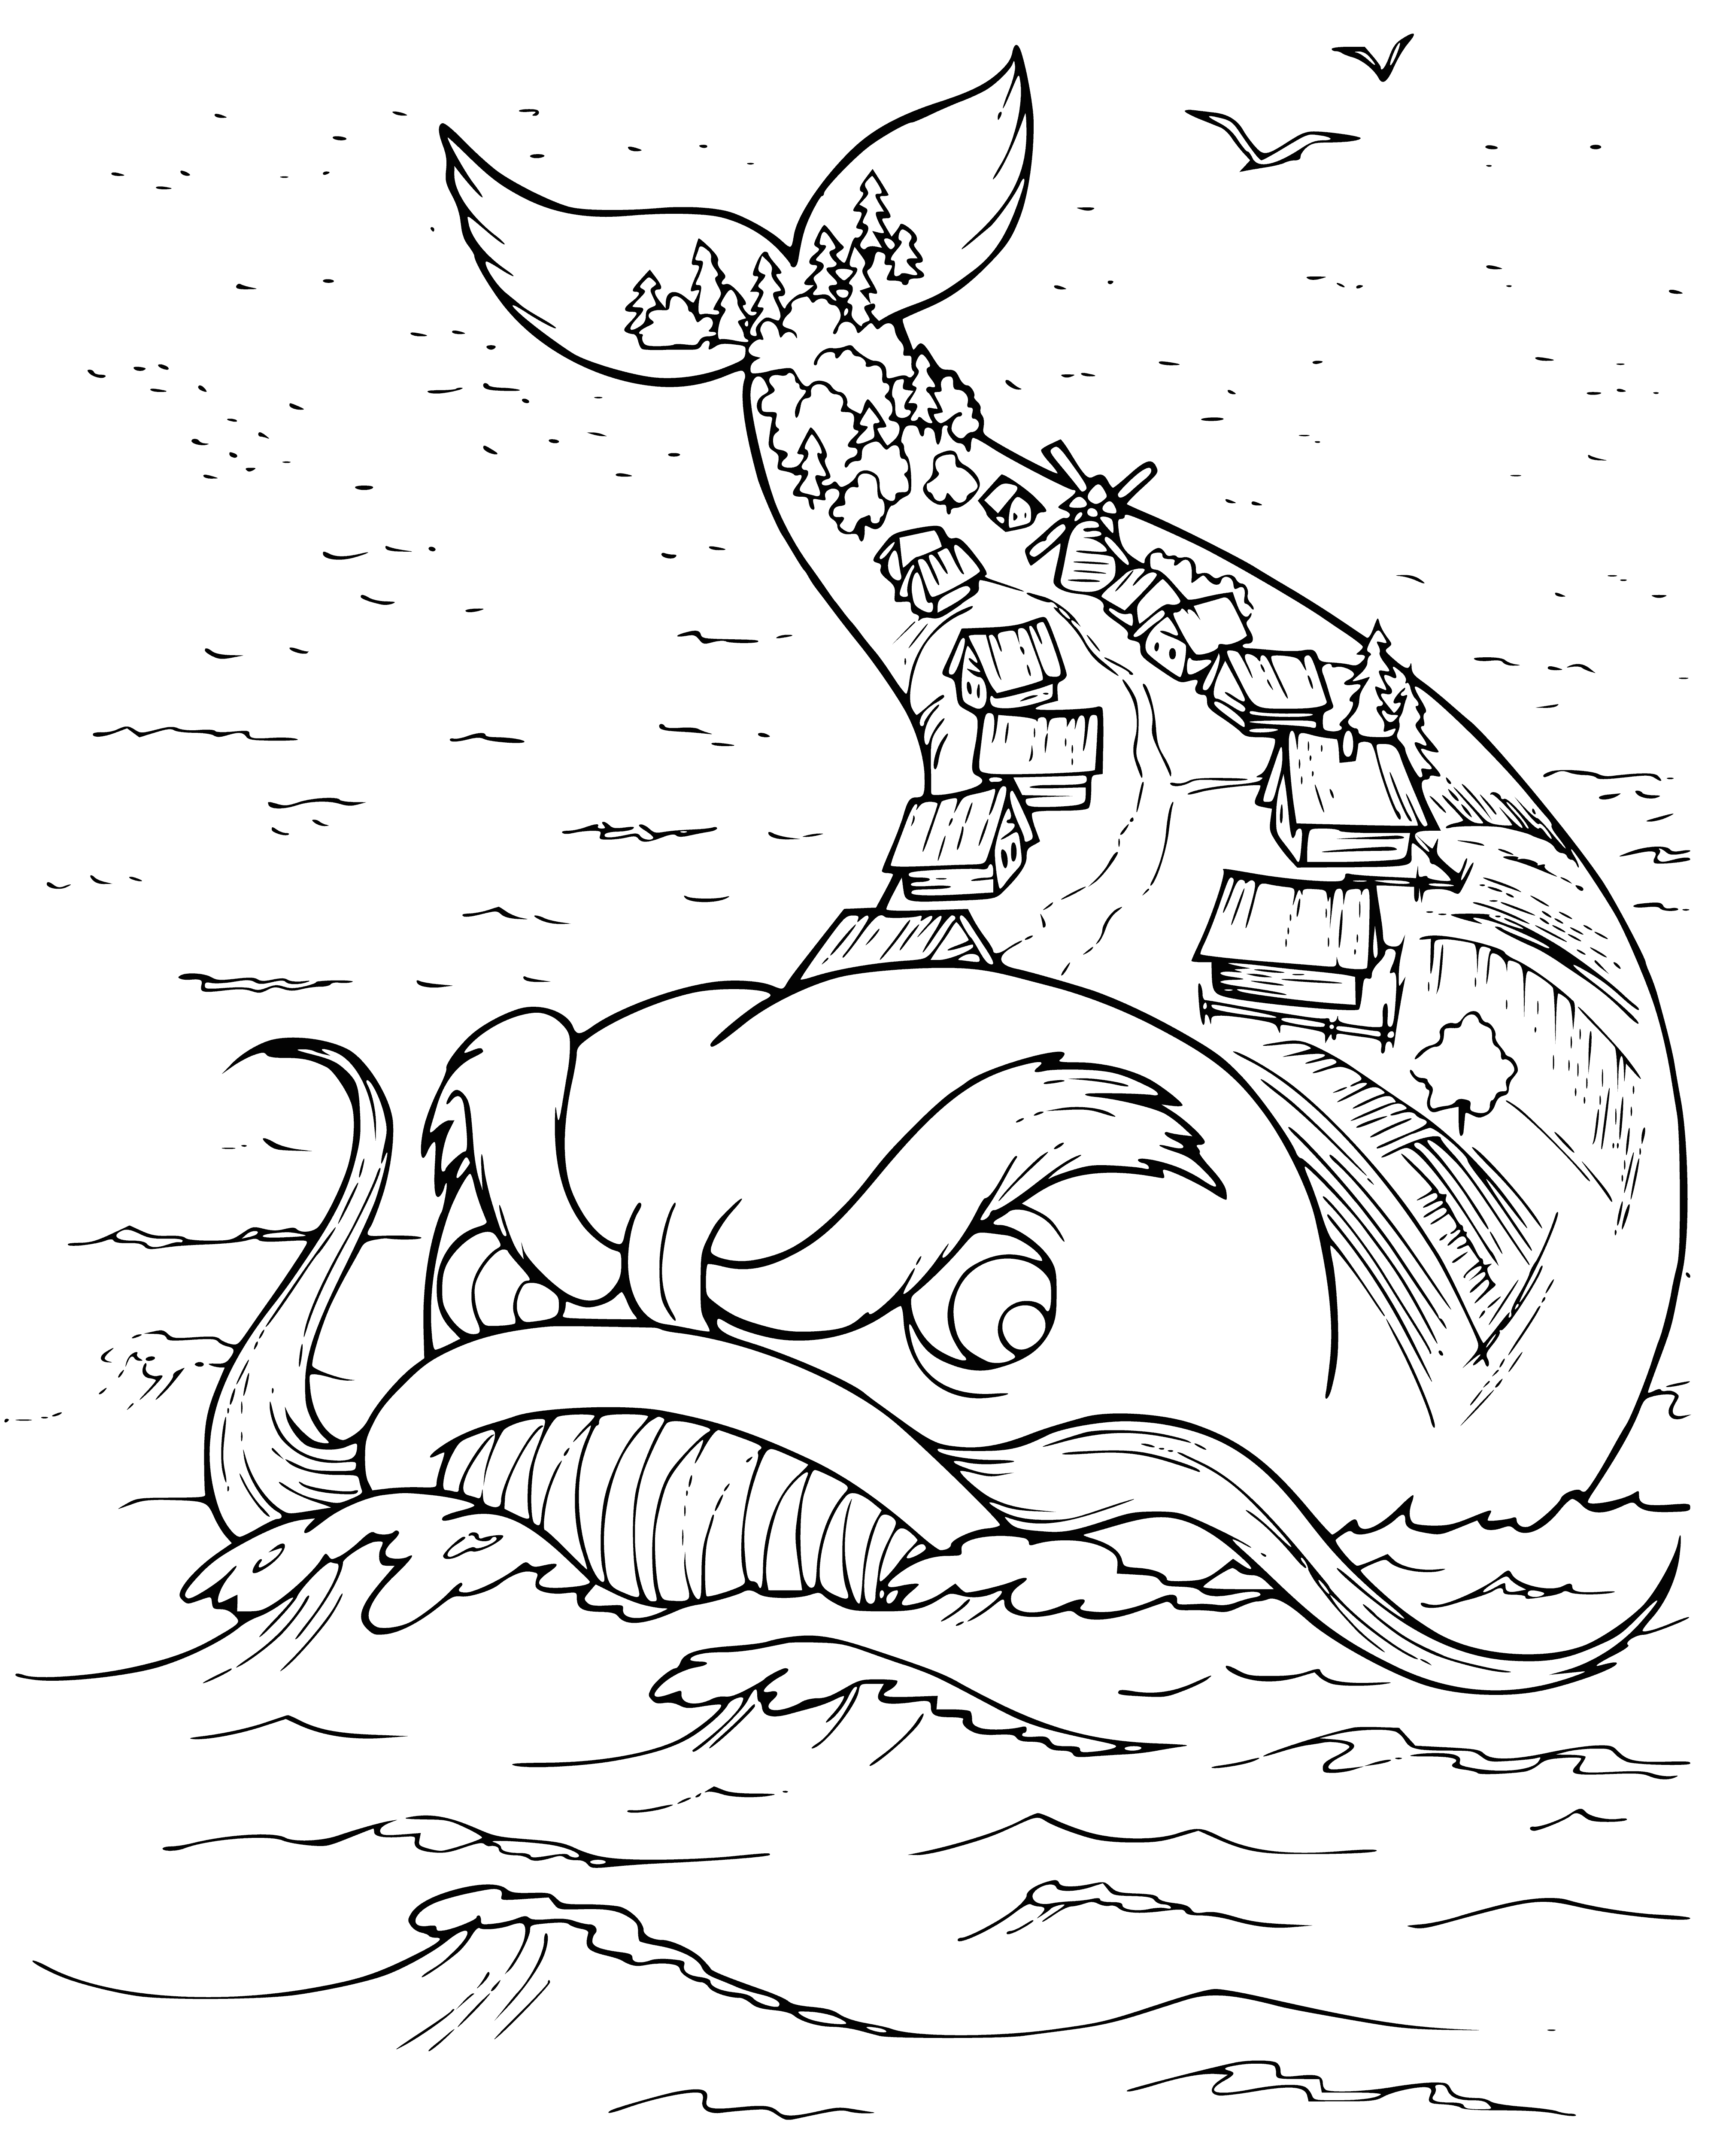 Wonder Yudo whale fish coloring page